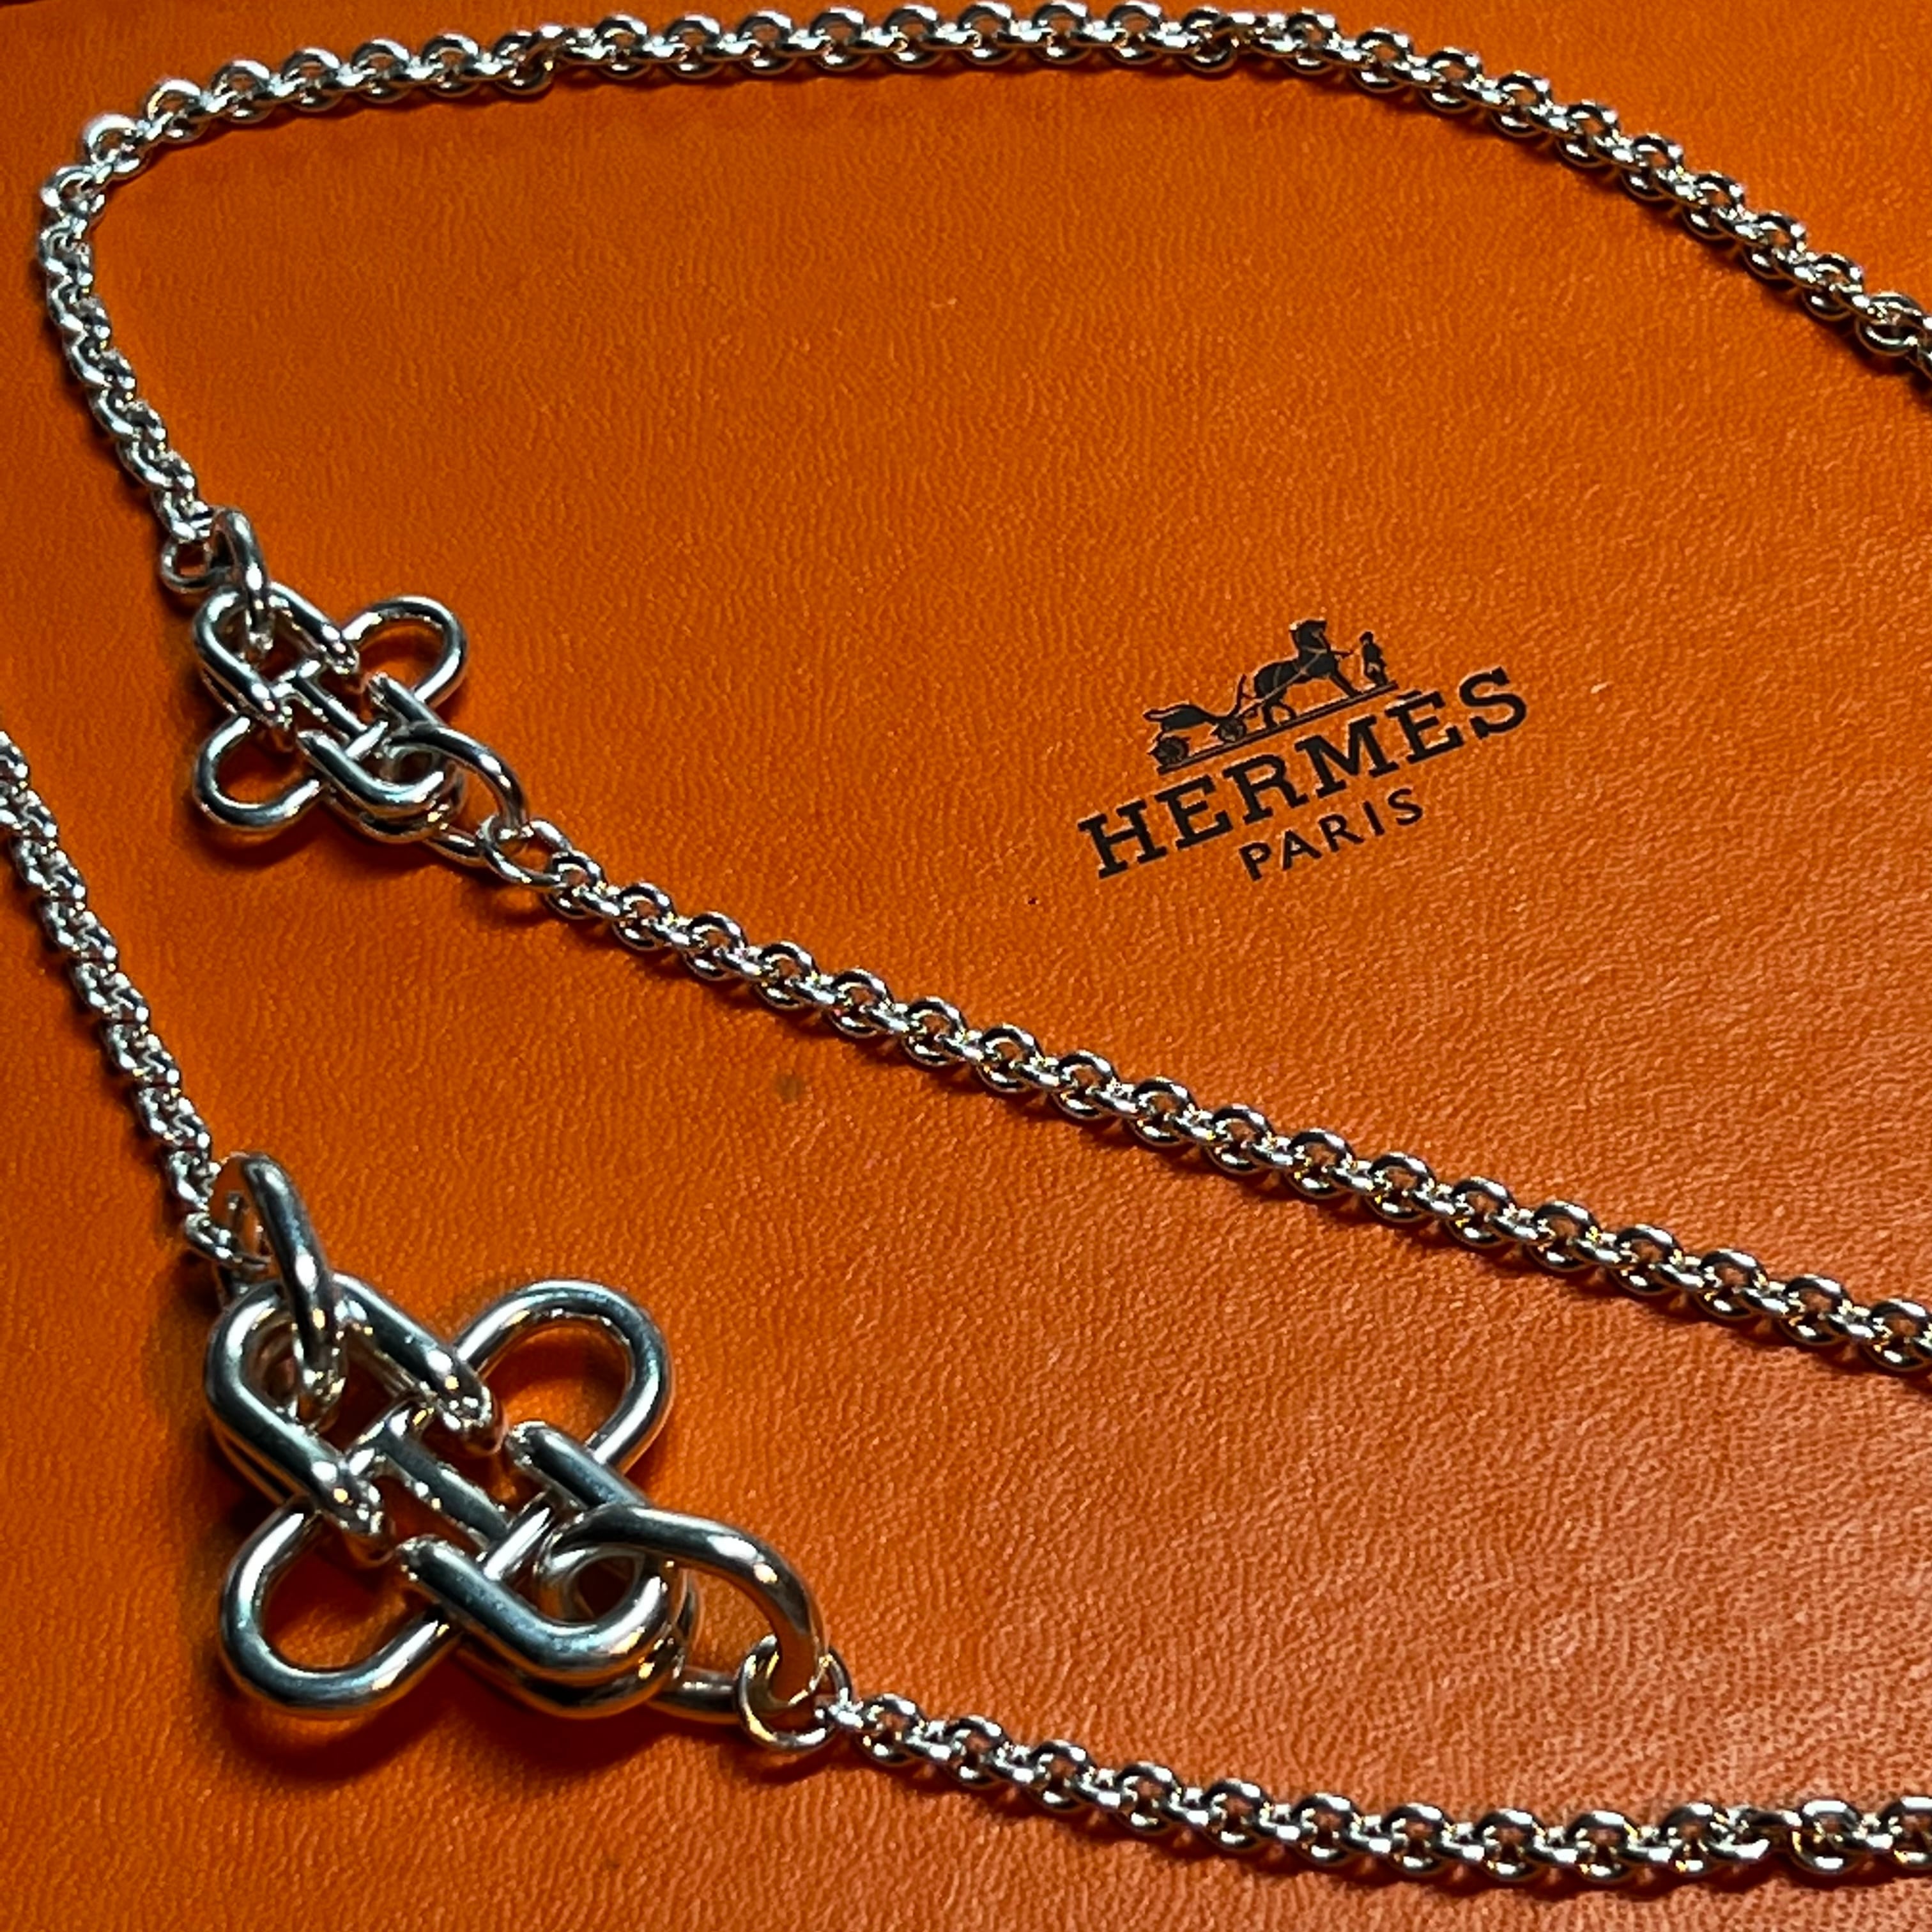 HERMES Rose de Mer Long Necklace Sterling Silver | エルメス ローズ ド メール ロング ネックレス  スターリング シルバー | THE OLDER VINTAGE powered by BASE